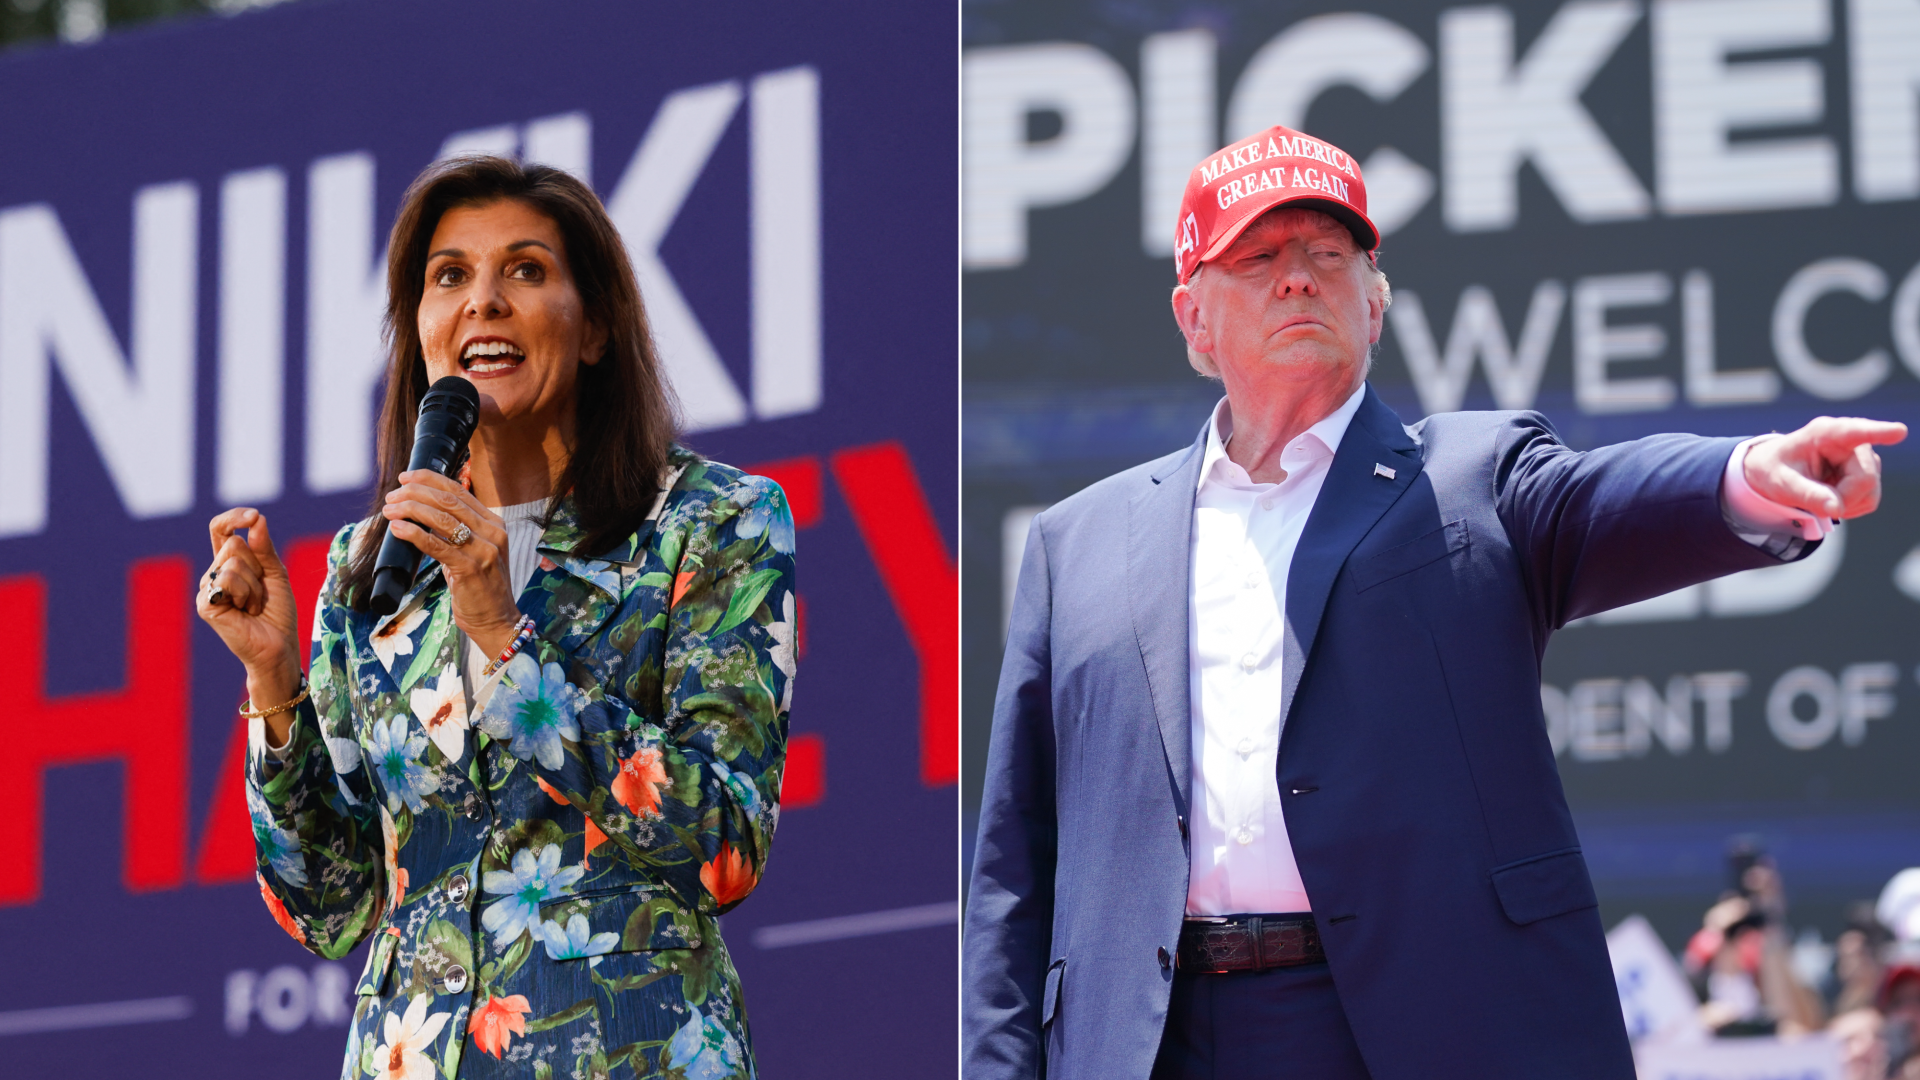 Side-by-side of Nikki Haley and Donald Trump speaking to supporters